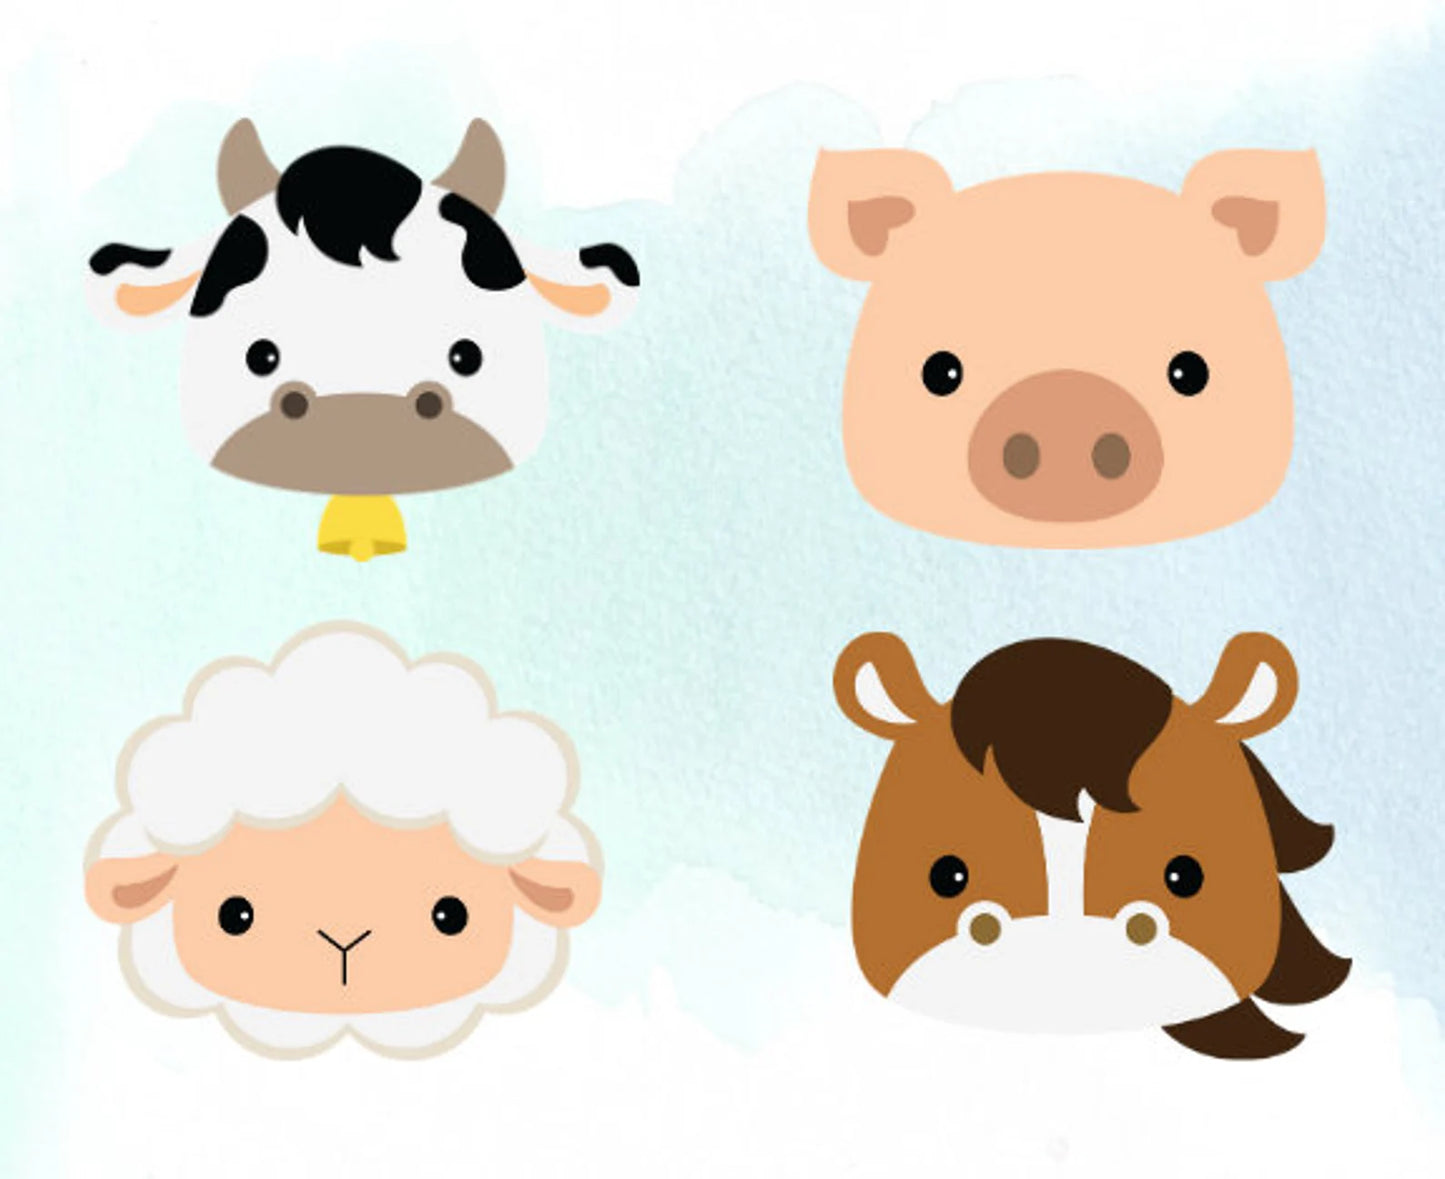 Sheep, Horse, Pig and Cow